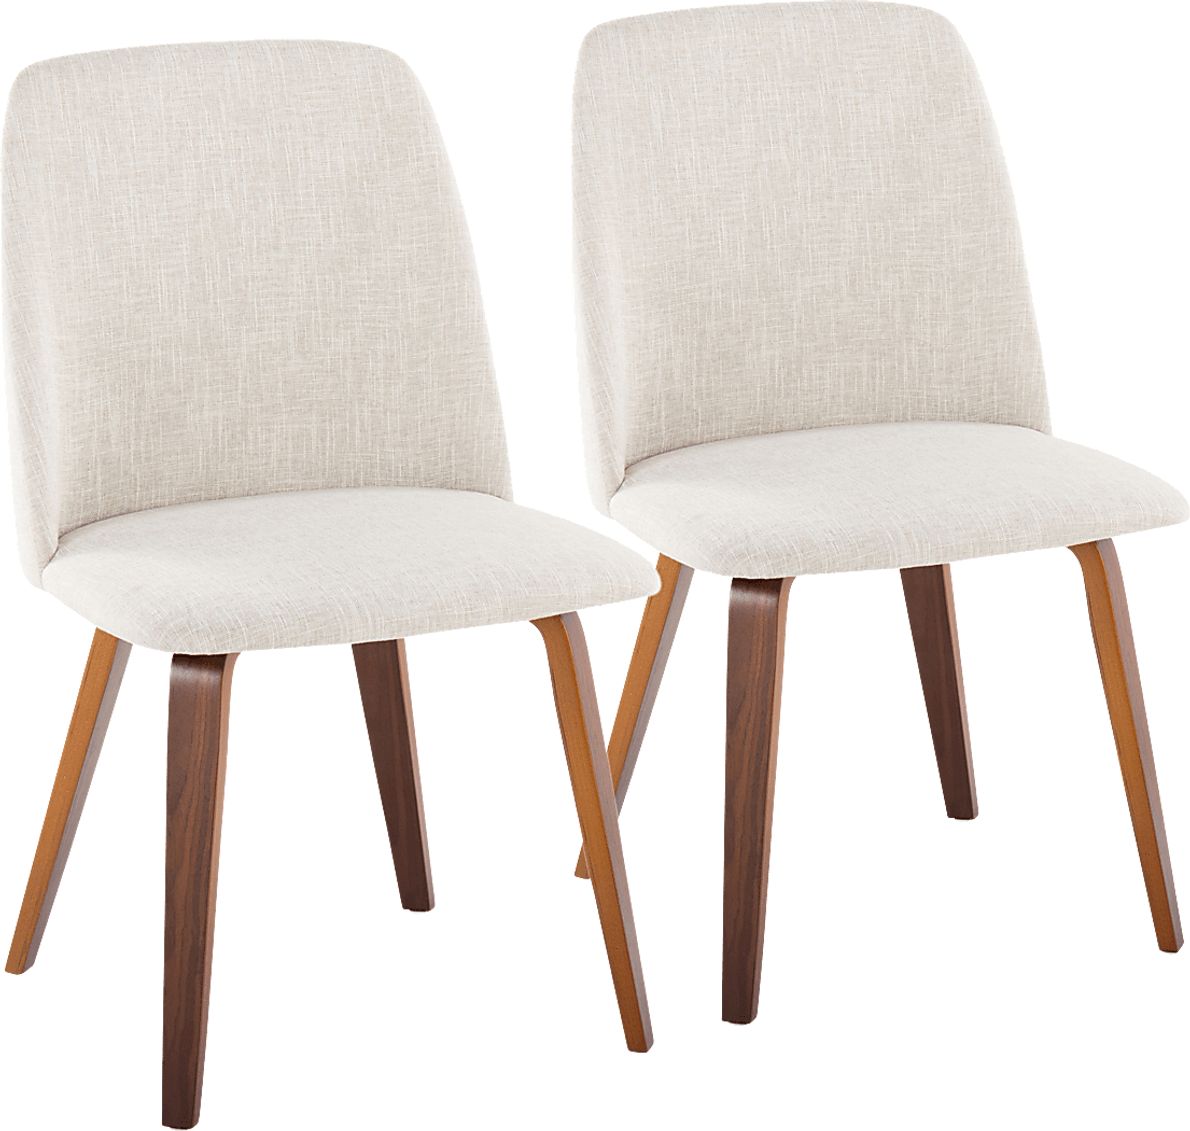 Verawood II Beige Dining Chair, Set of 2